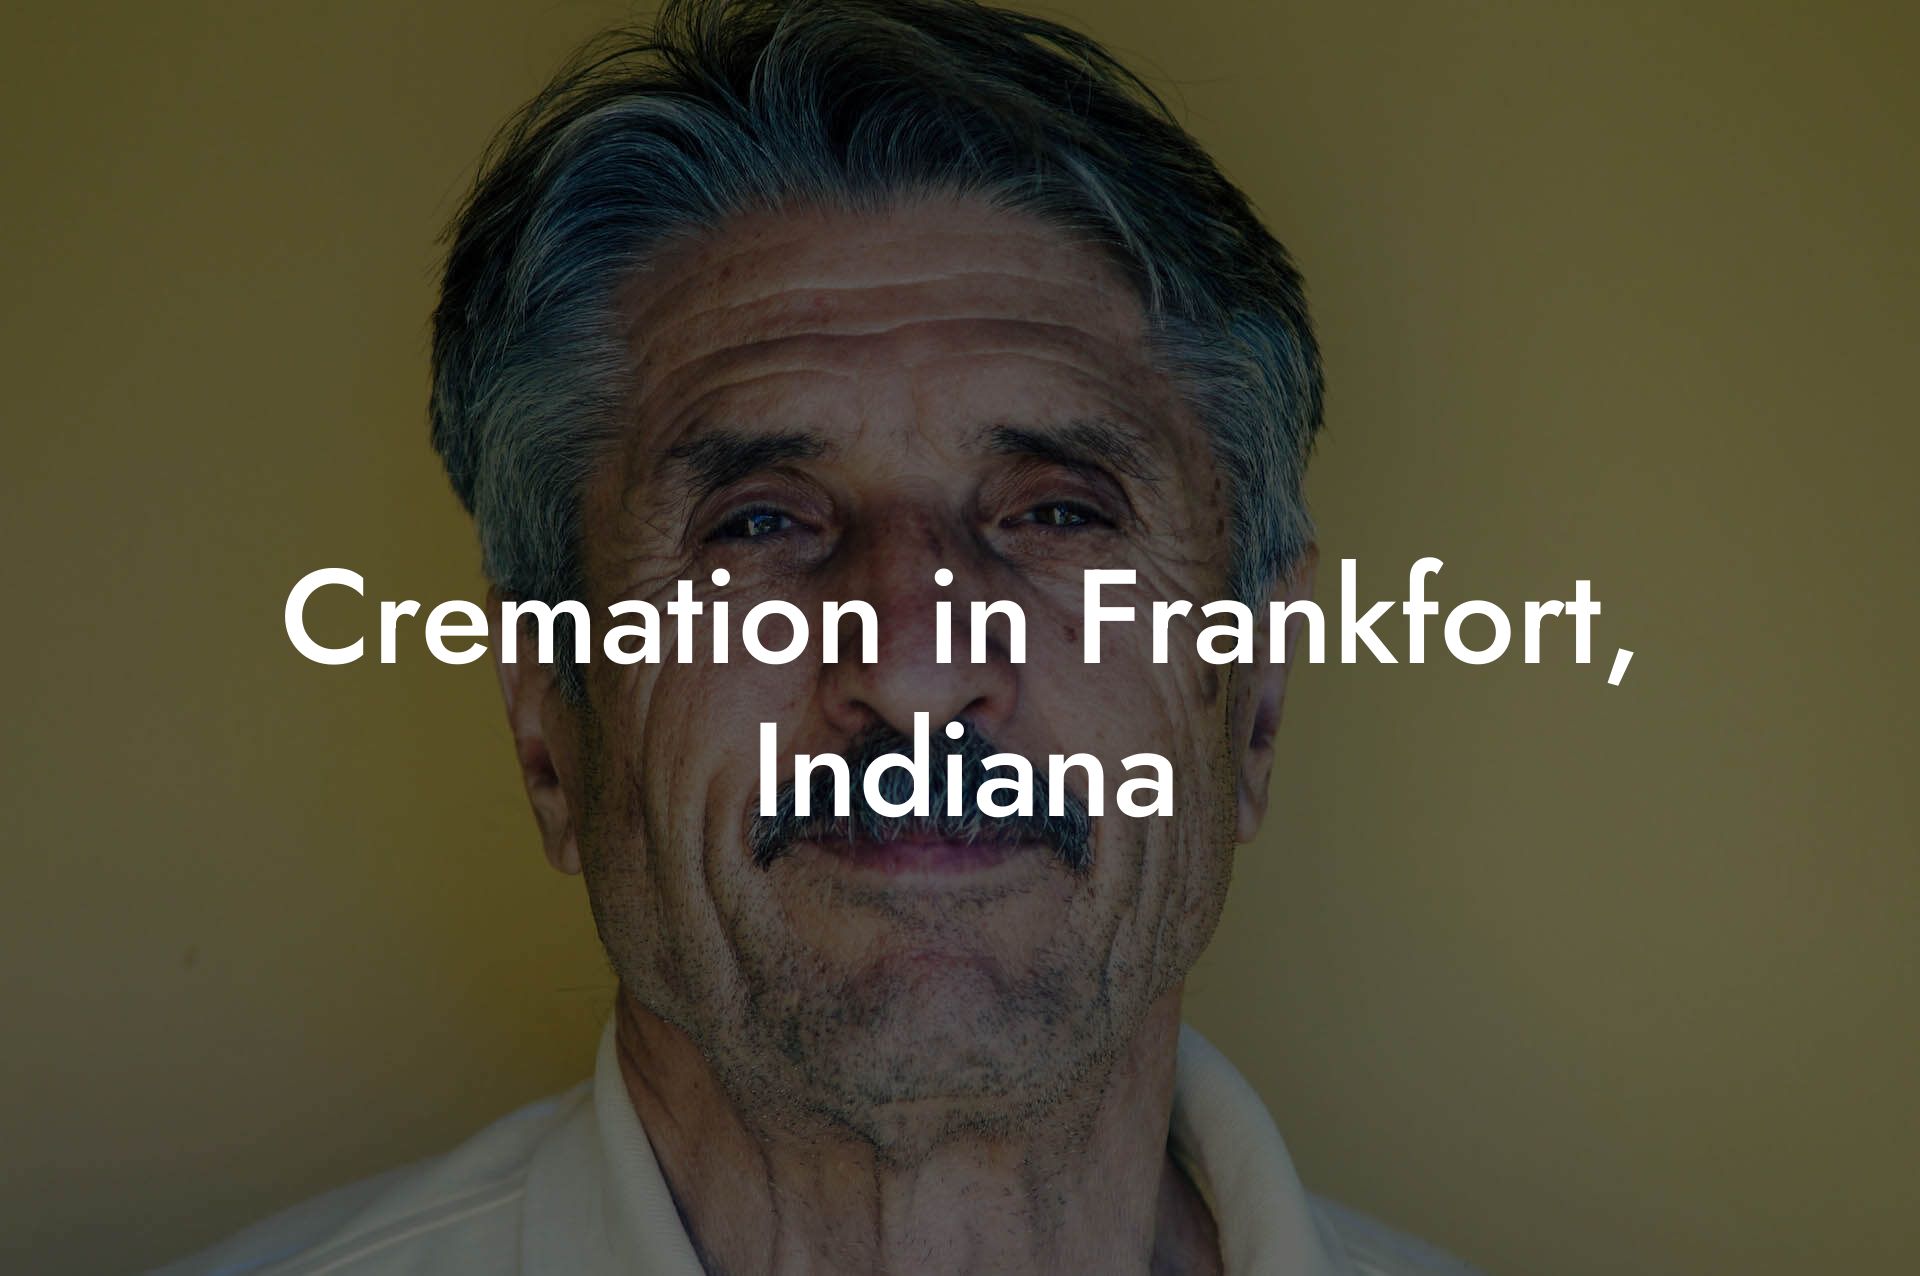 Cremation in Frankfort, Indiana